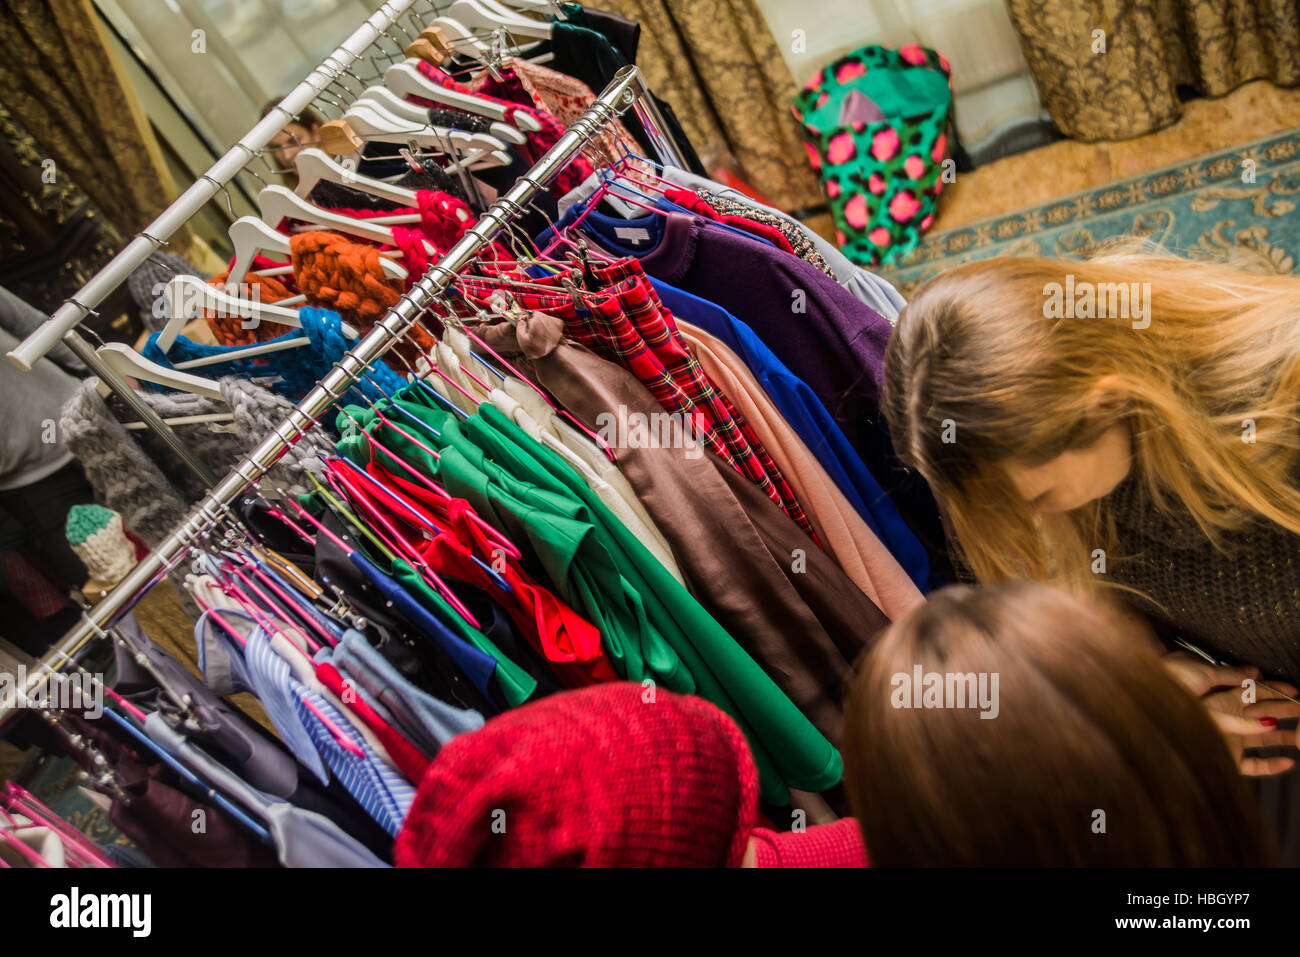 Group of young beautiful women shopping in fashion mall, choosing new clothes, looking through hangers with different casual colorful garments on hang Stock Photo